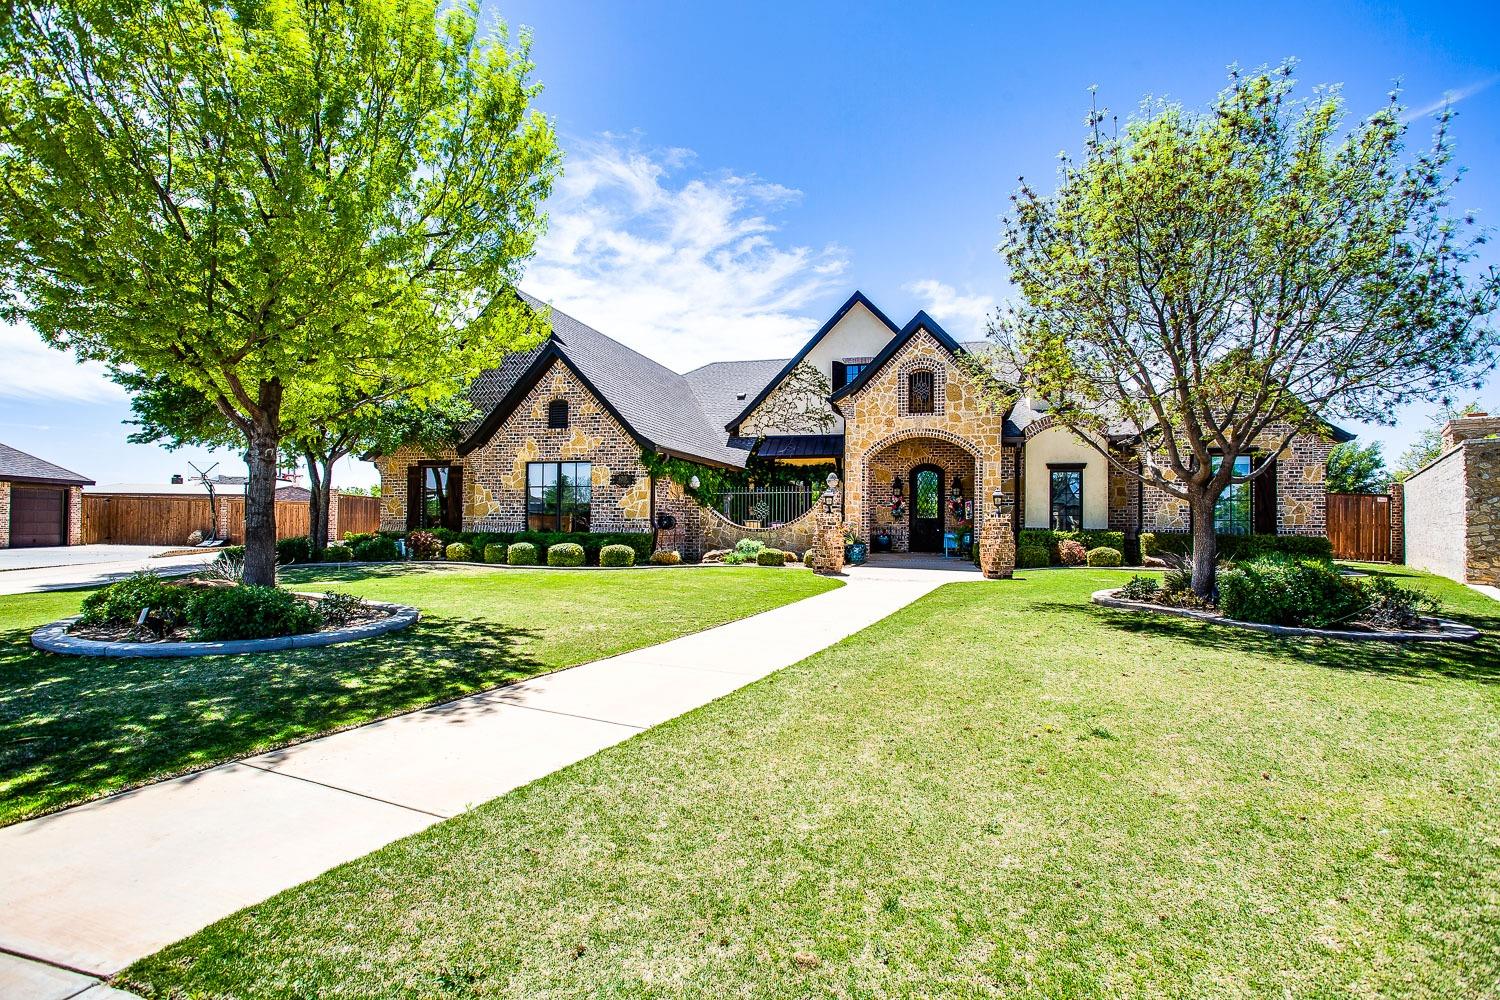 Welcome to this exquisite French Country home with European style built by Dan Wilson! Curb appeal 10/10, brick, stone, and stucco greets you upon arrival, along with a secluded front porch that is enclosed with custom iron work and gate with water feature and french doors going into the kitchen.  Step inside to brick entryway to the custom stained cabinetry throughout. The master suite boasts an office overlooking the pristine pool, an oversized closet, and a uniquely designed double-barrel ceiling. The living space offers cathedral ceilings soaring to 22 feet adorned with rustic beams, while the dining area features a captivating dome ceiling. The game room offers cathedral ceilings, rustic beams, a wet bar that's perfect for entertaining. Boutique lighting throughout, Christmas closet with built-ins. The gourmet kitchen features double ovens, an oversized pantry with a custom painted door from Peru. Secluded guest quarters with a private bathroo